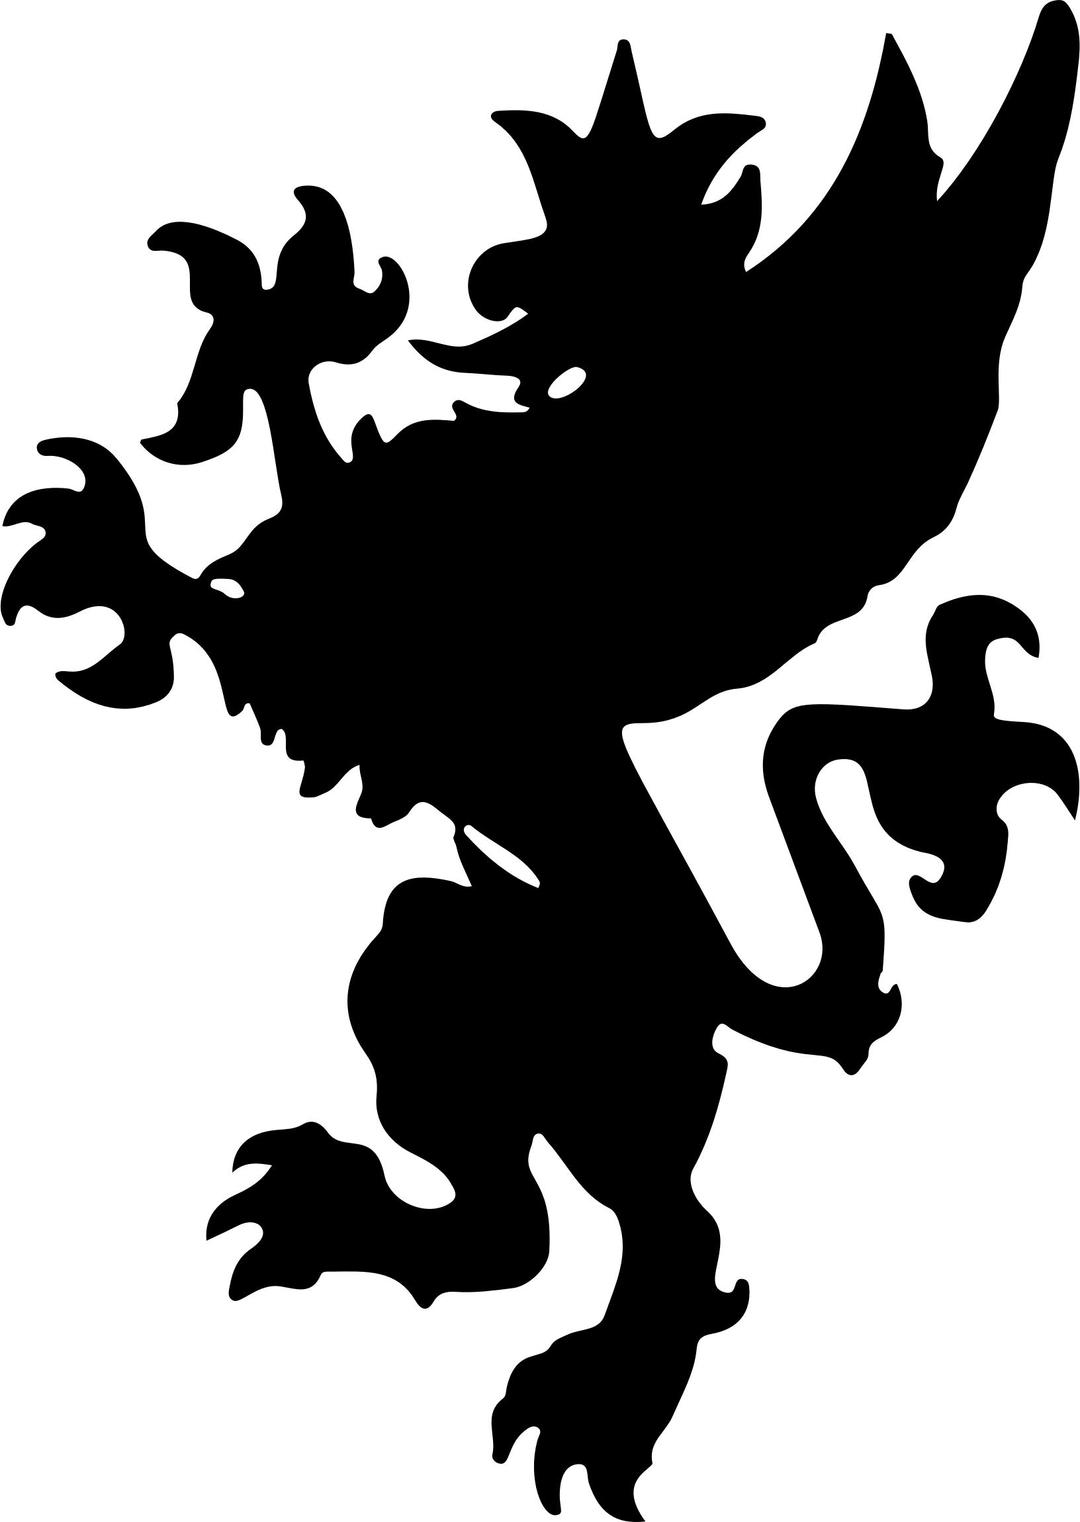 Griffin Silhouette png transparent